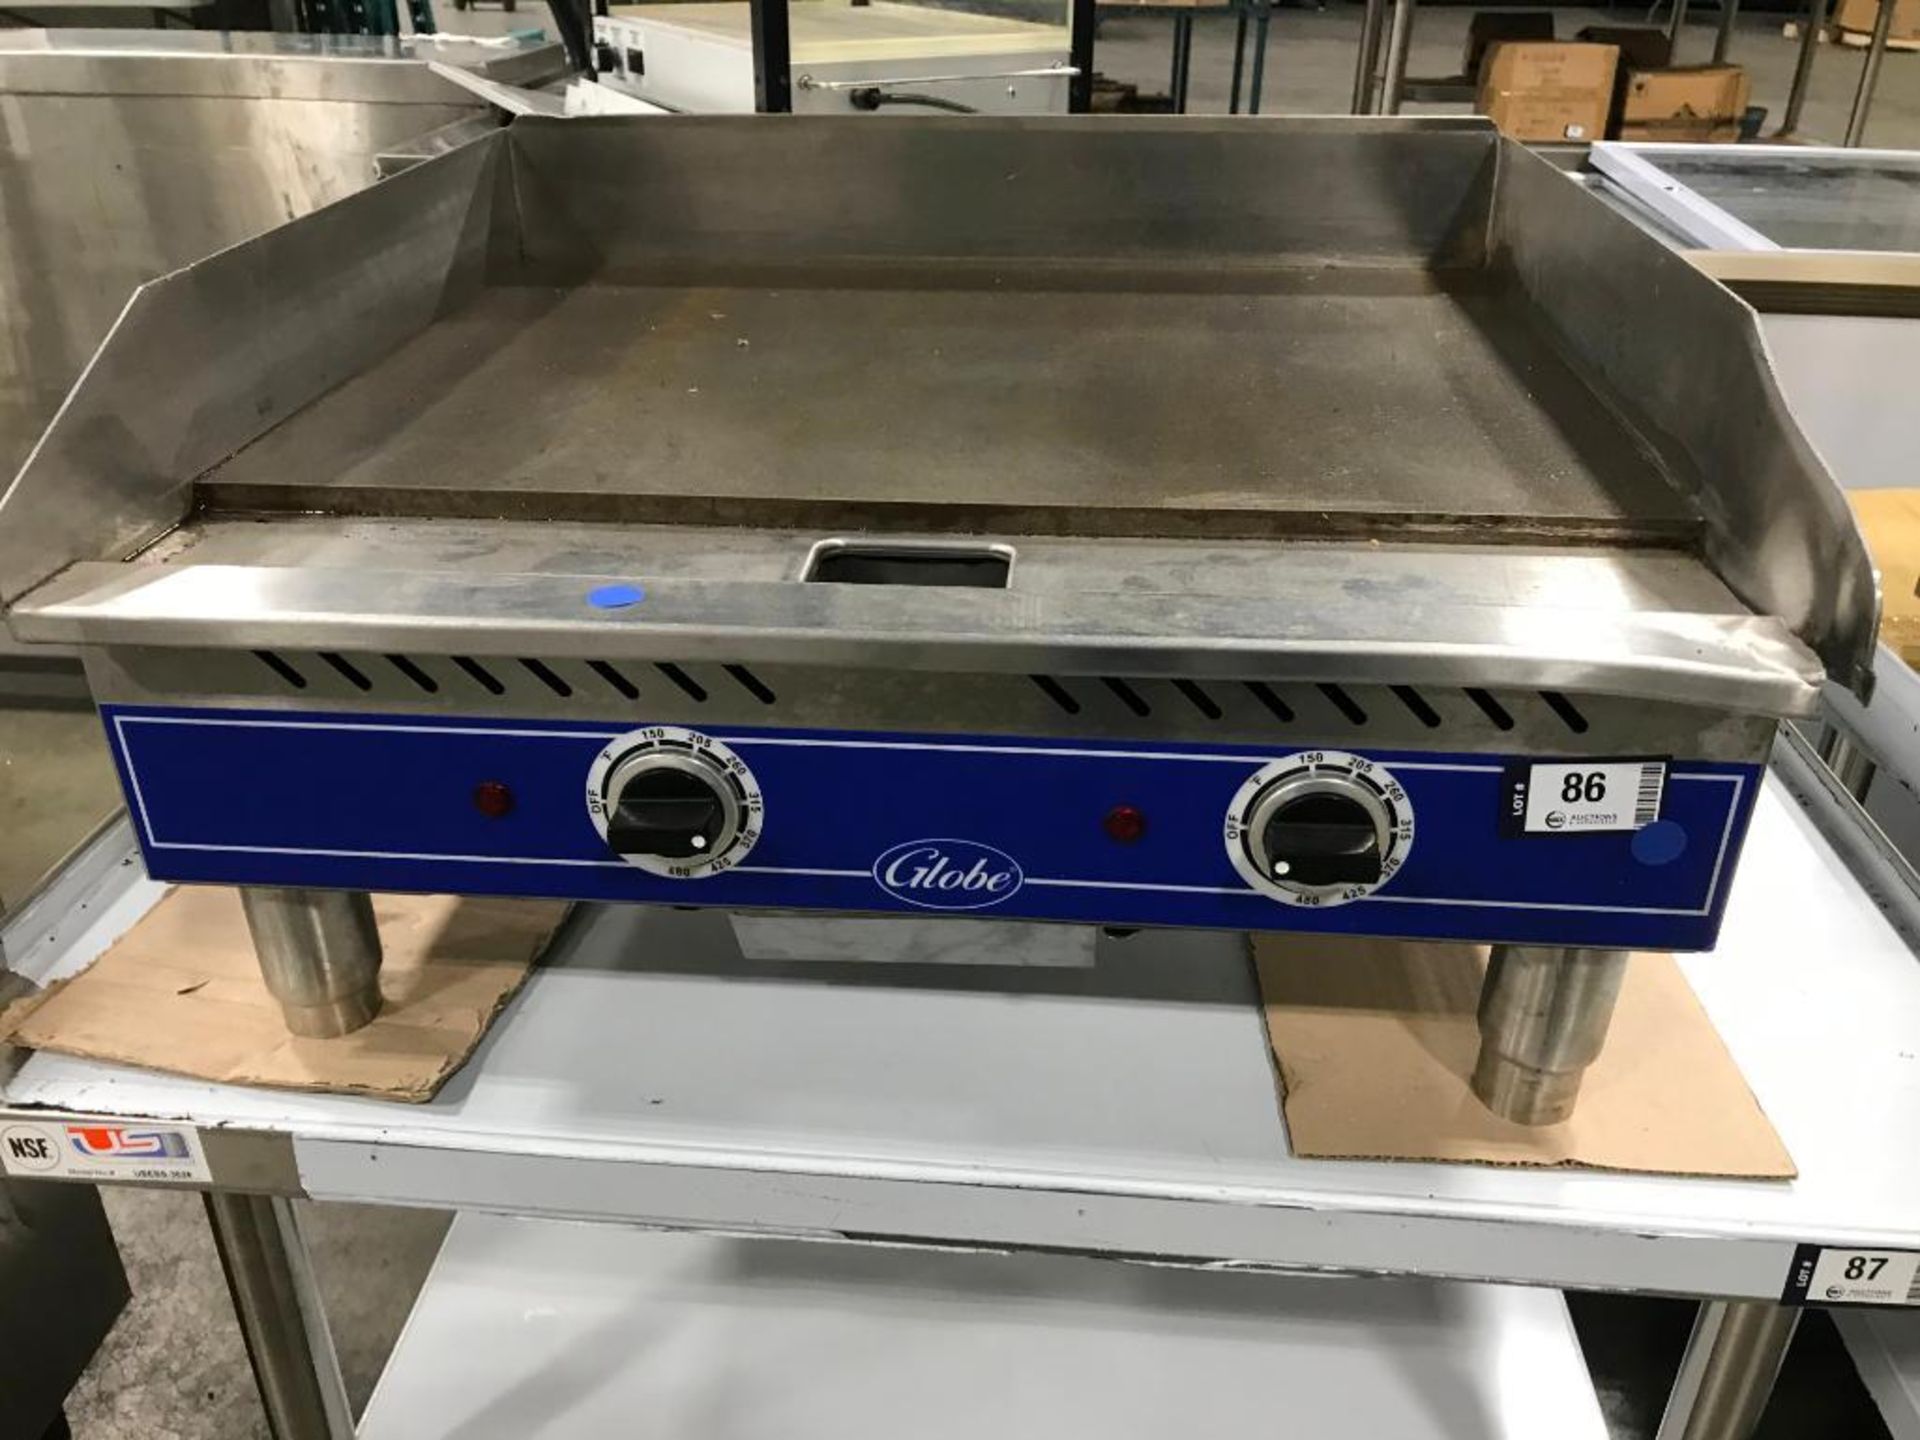 GLOBE GEG24 ELECTRIC COUNTERTOP GRIDDLE - 5600W - Image 4 of 4